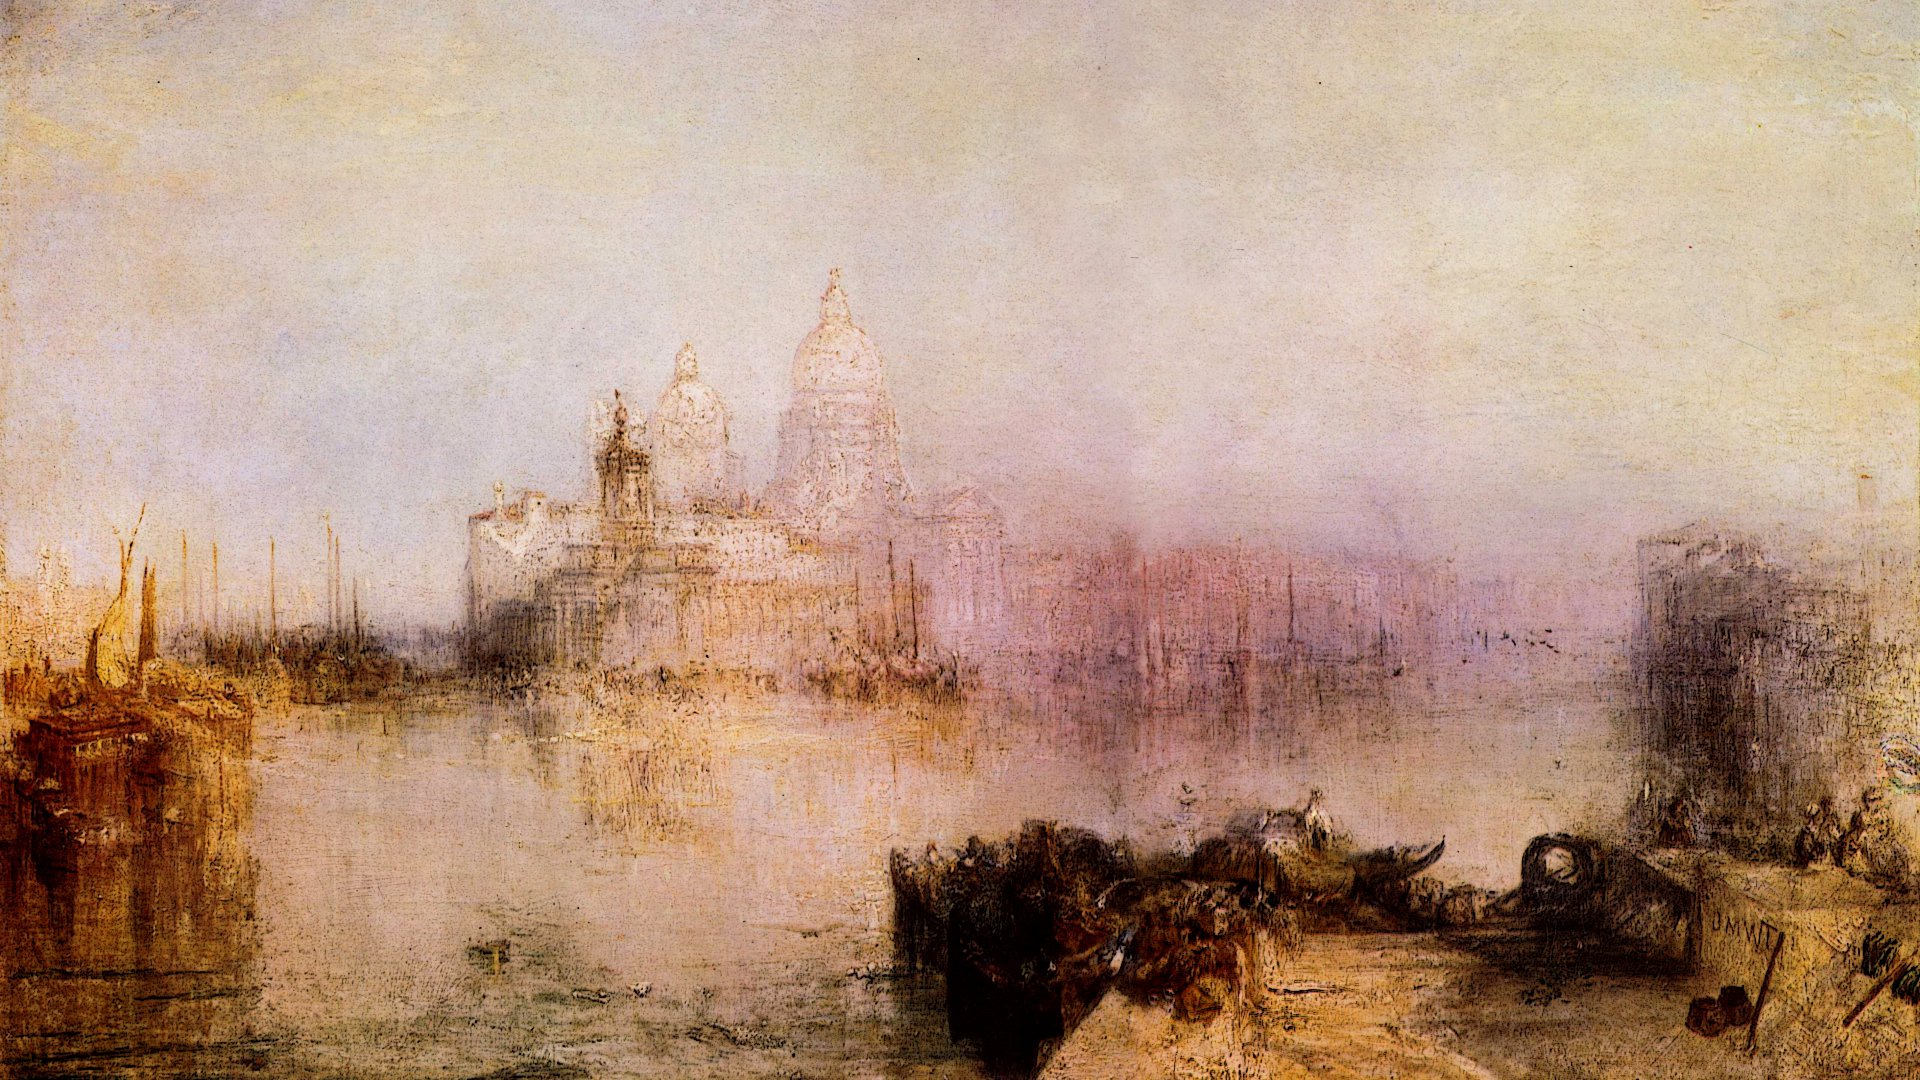 Venice Painting Wallpapers